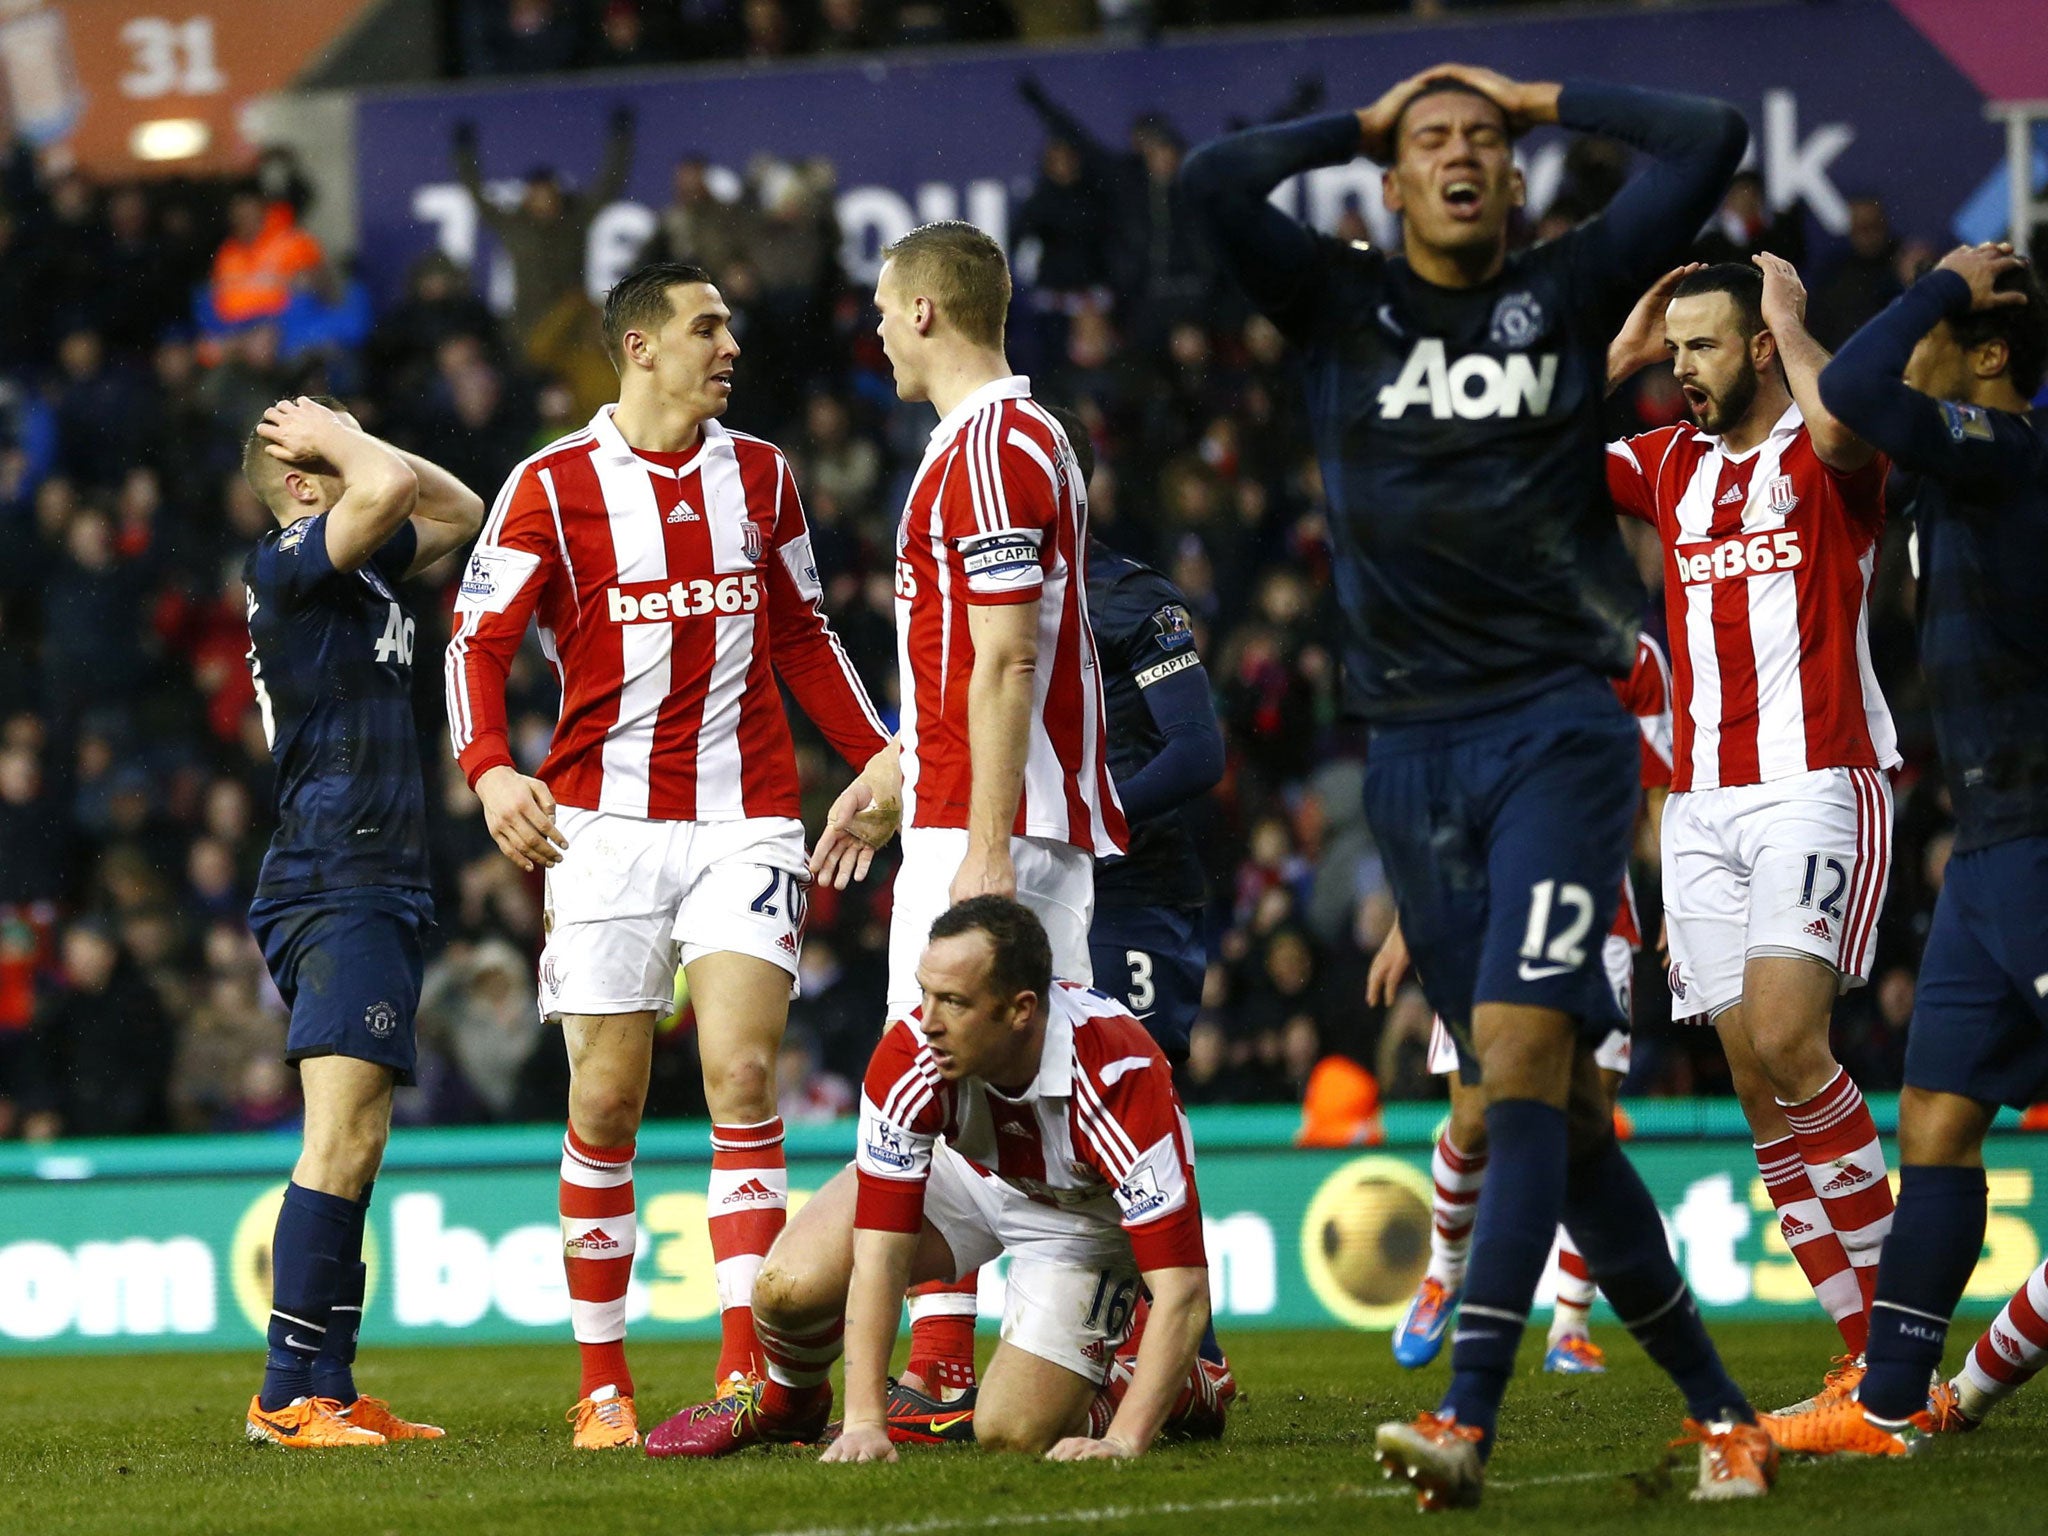 Manchester United players react after a chance goes begging against Stoke